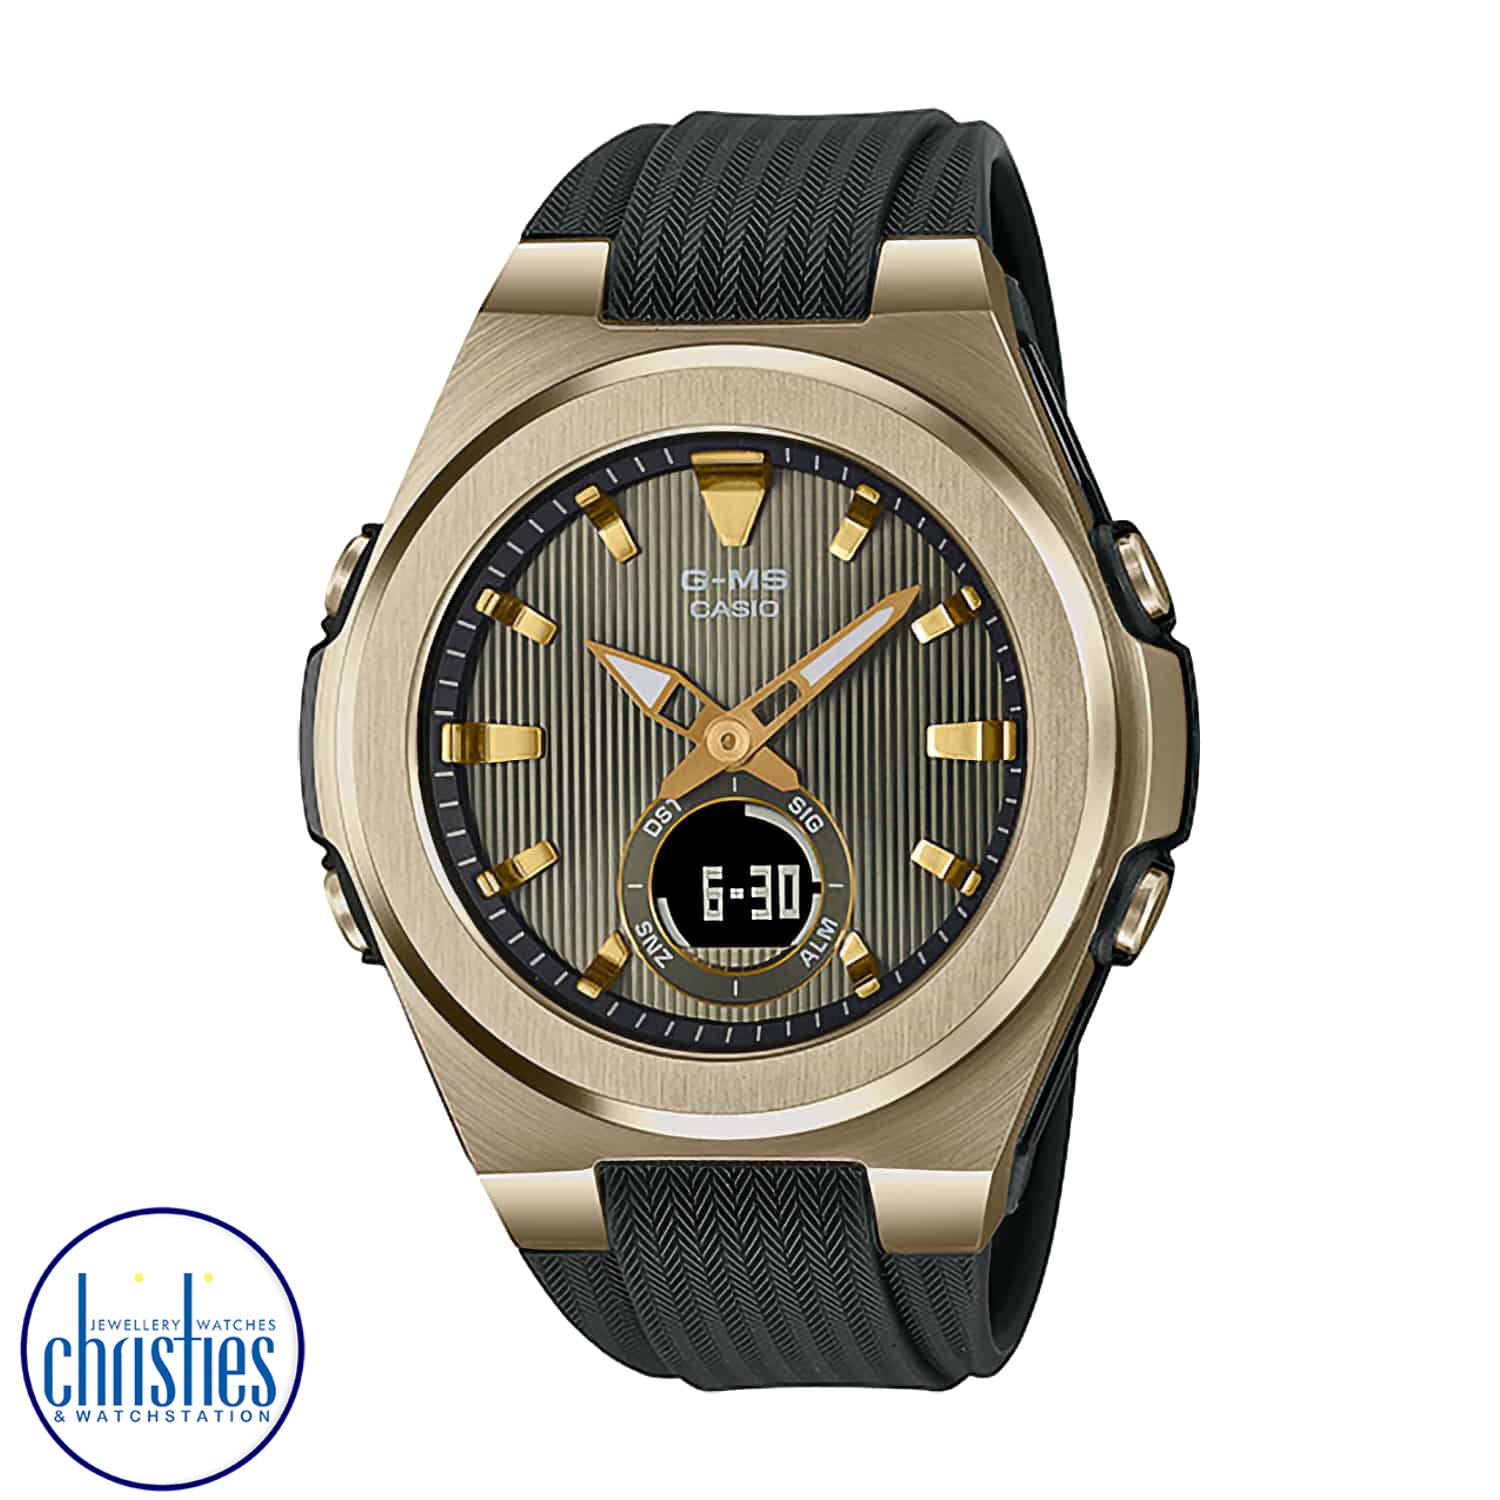 MSGC150G-3A BABY-G G-MS Watch. Stay on top of your game at work and at play with sophisticated comfort and G-SHOCK strength in a special silky-smooth G-MS timepiece. The oversized case makes a bold, powerful statement. Add in the flat bezel and distin G-s